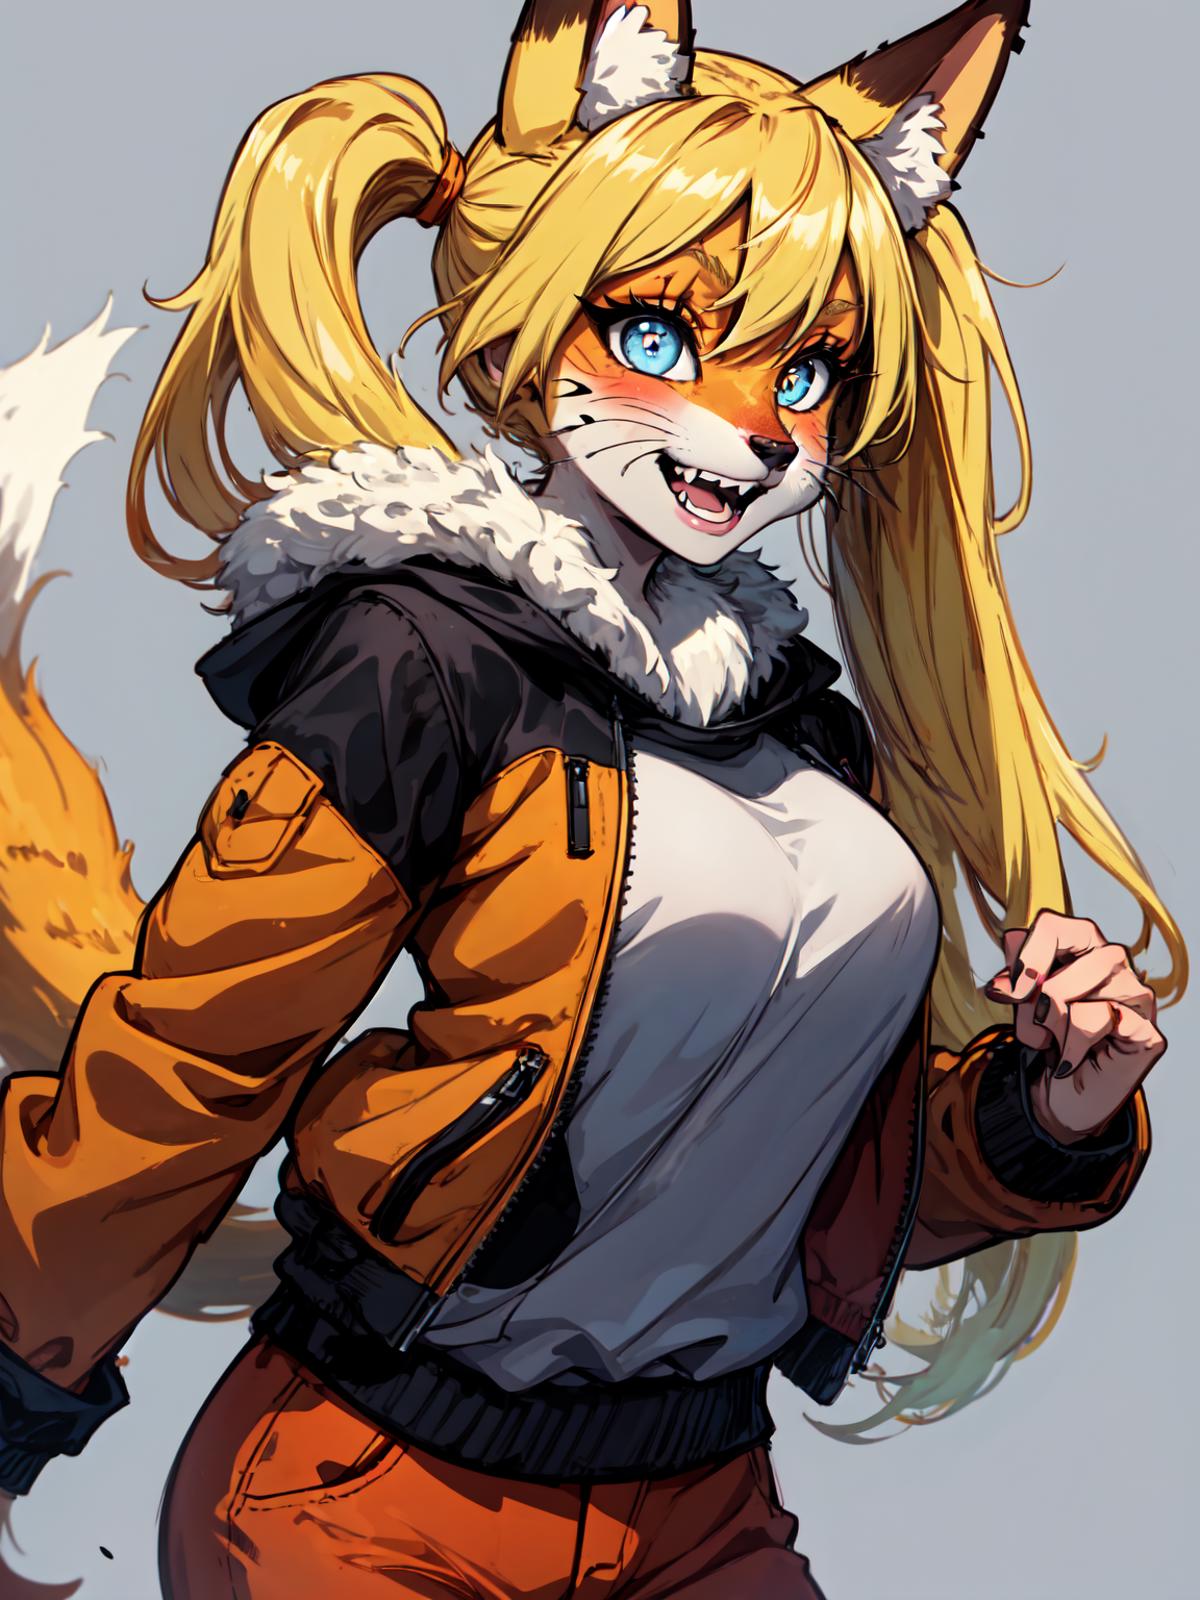 Furry Fox Girl Style #2 - Transform Characters into Fox Girls! image by neilarmstron12